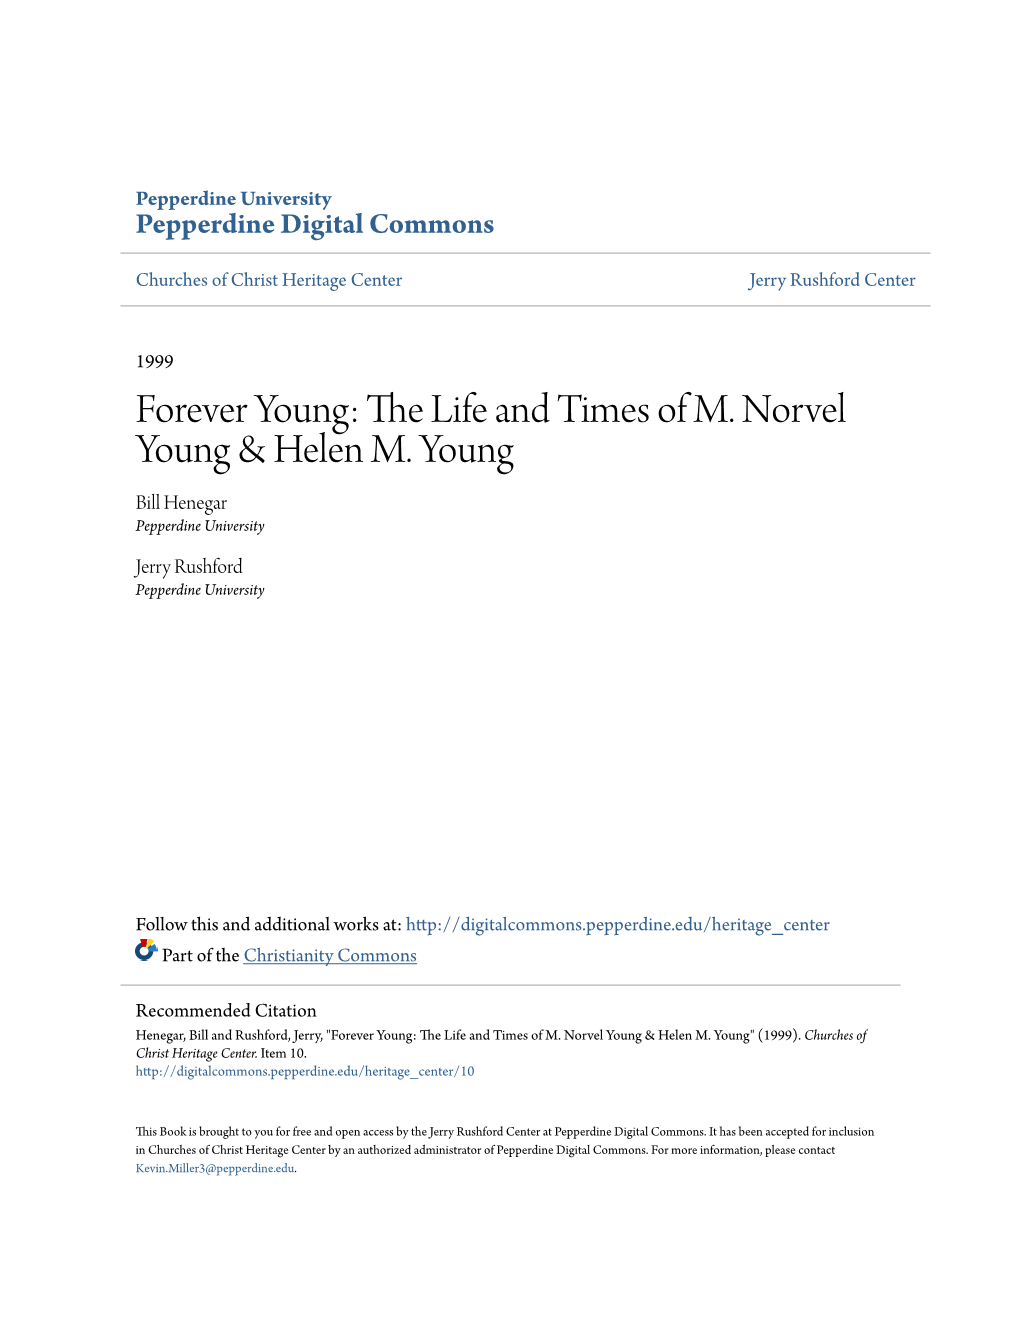 Forever Young: the Life and Times of M. Norvel Young & Helen M. Young